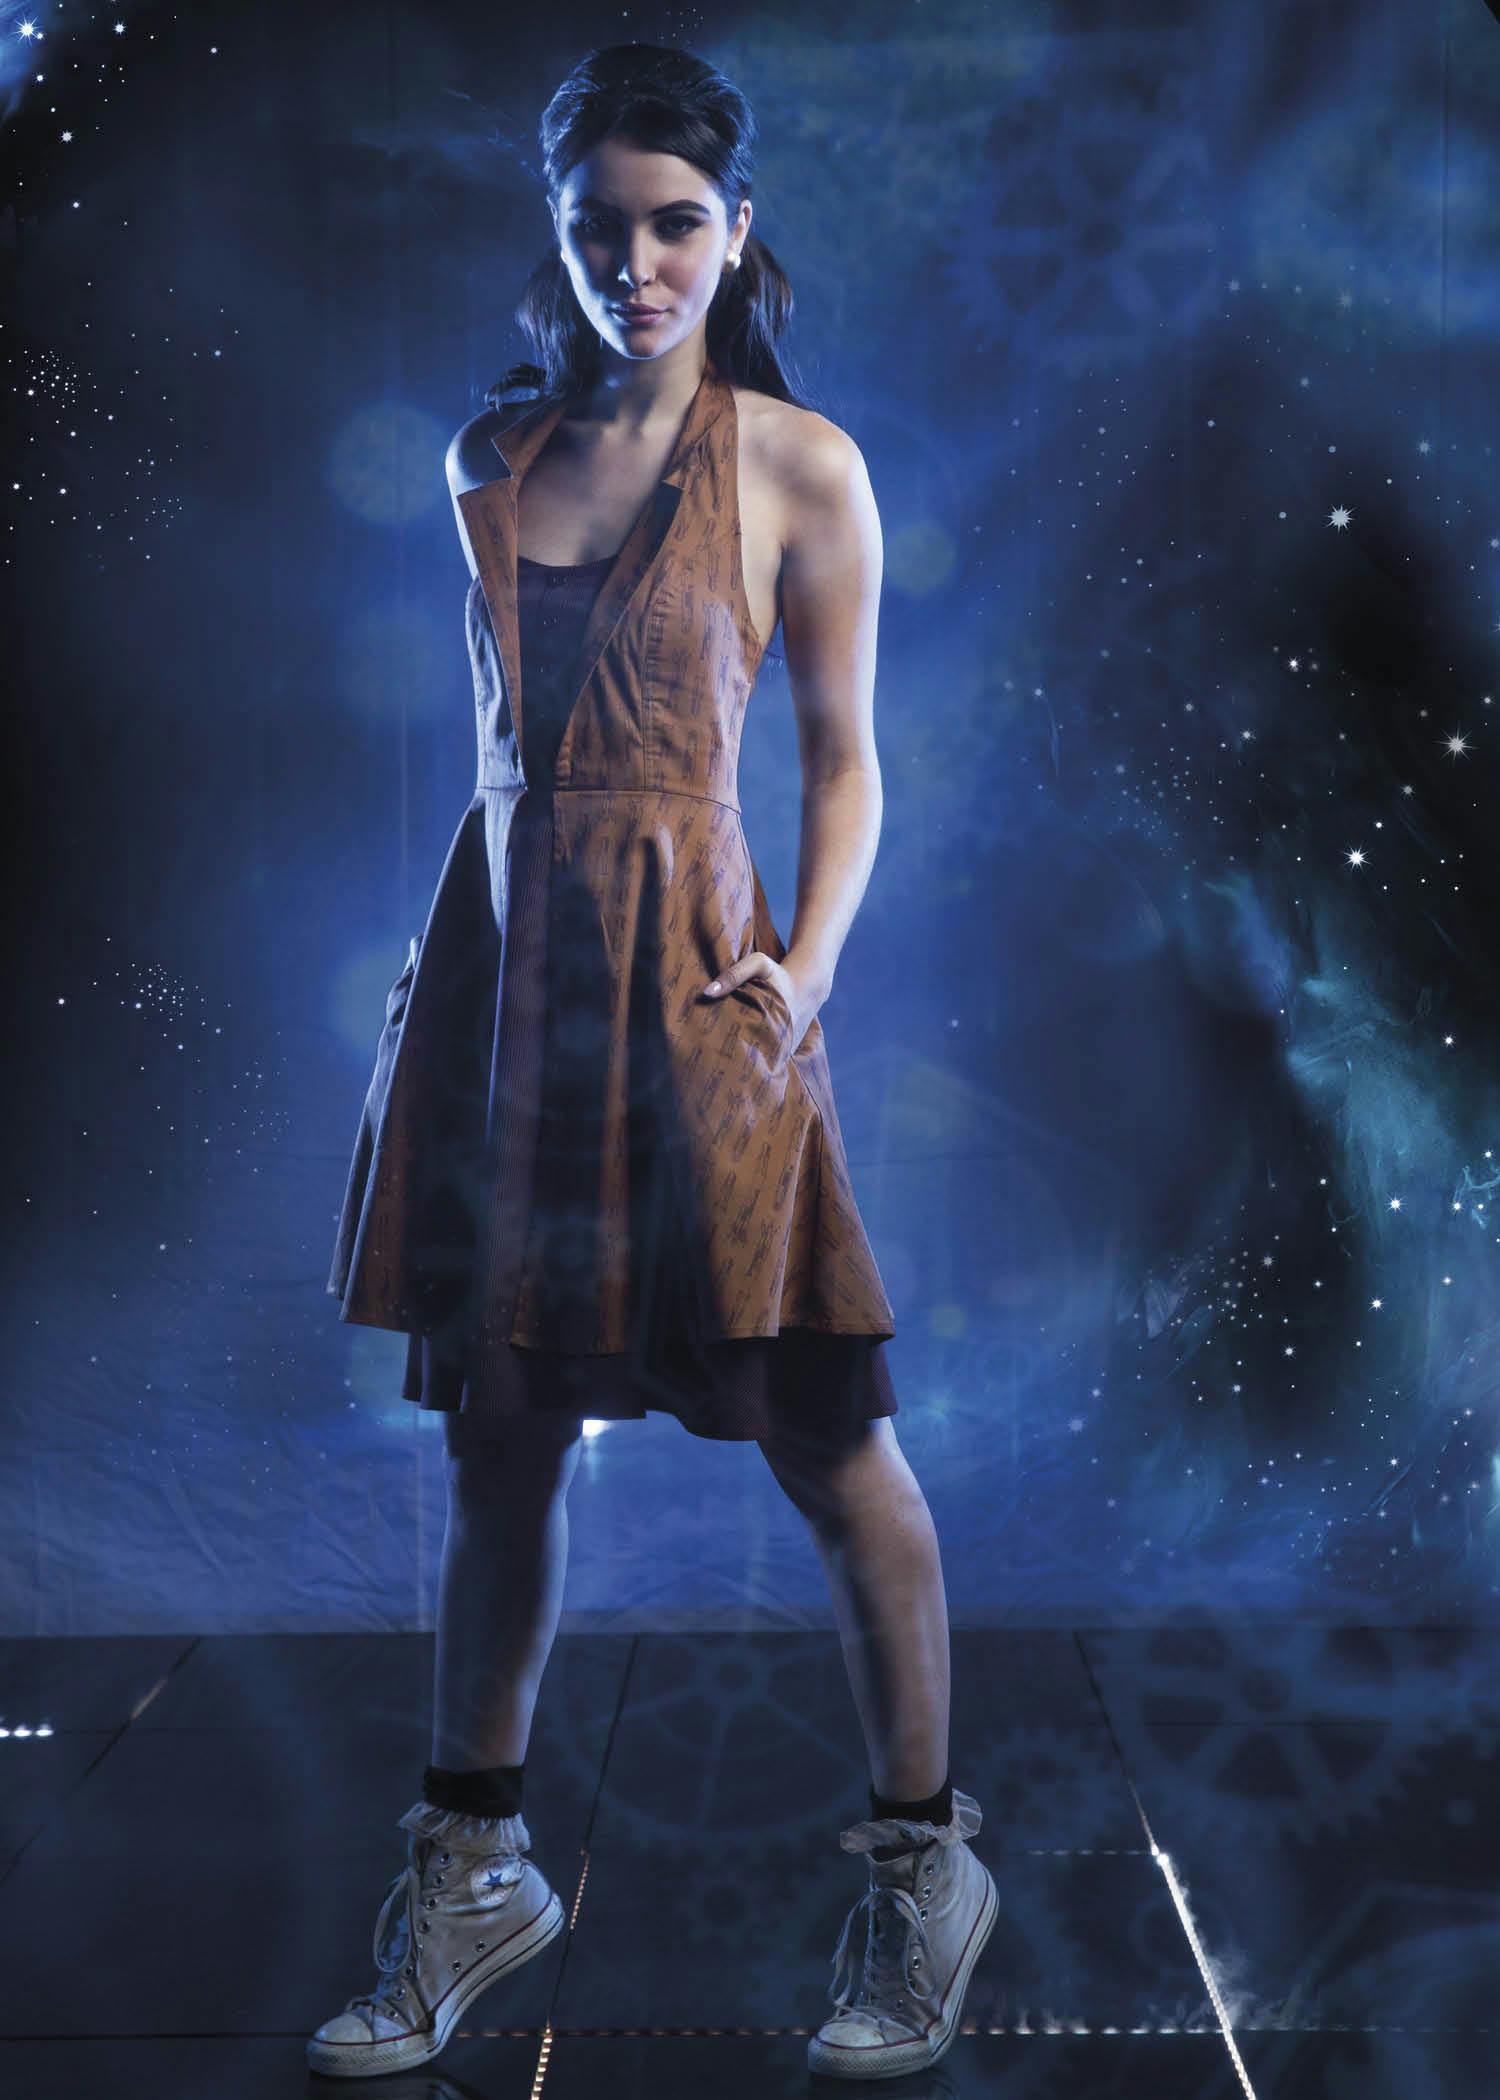 Regeneration Dress (coming soon): $64.50 at select Hot Topic stores and HotTopic.com 